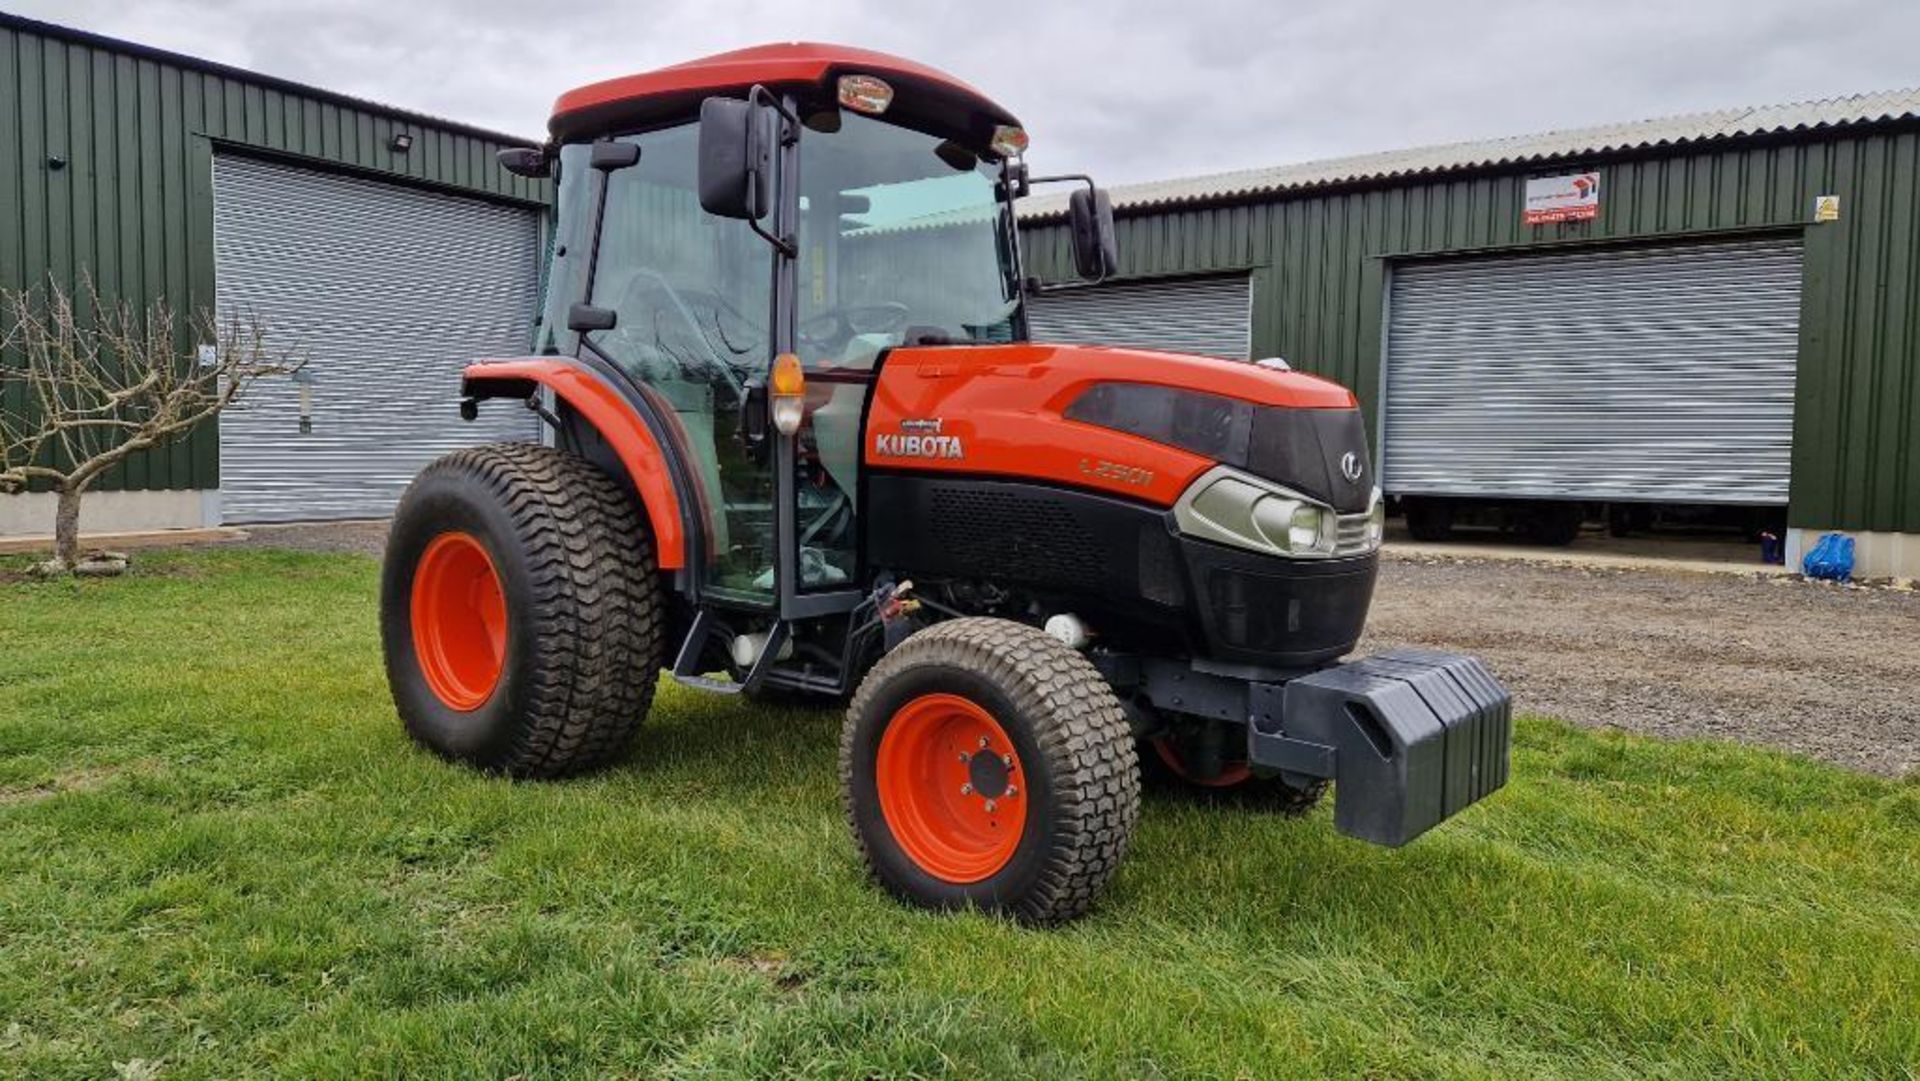 2020 Kubota L2501 4wd compact tractor with air con, DAB radio, CAT1 link arms, 2 rear spools, front - Image 13 of 14